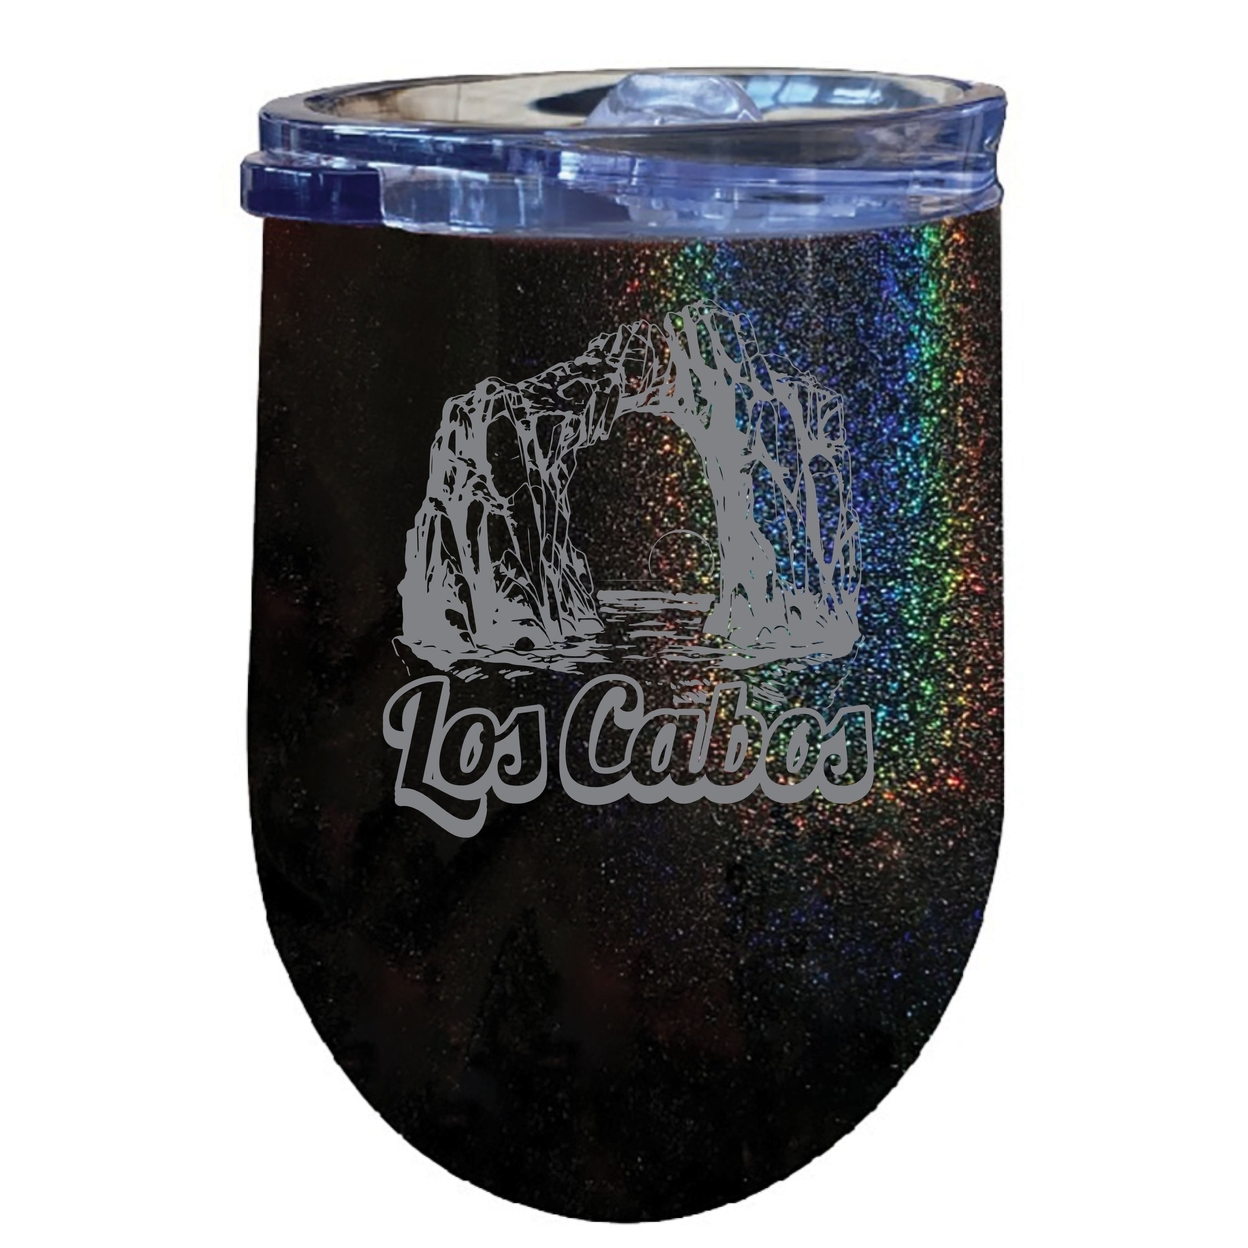 Los Cabos Mexico Souvenir 12 Oz Engraved Insulated Wine Stainless Steel Tumbler - Rose Gold,,4-Pack